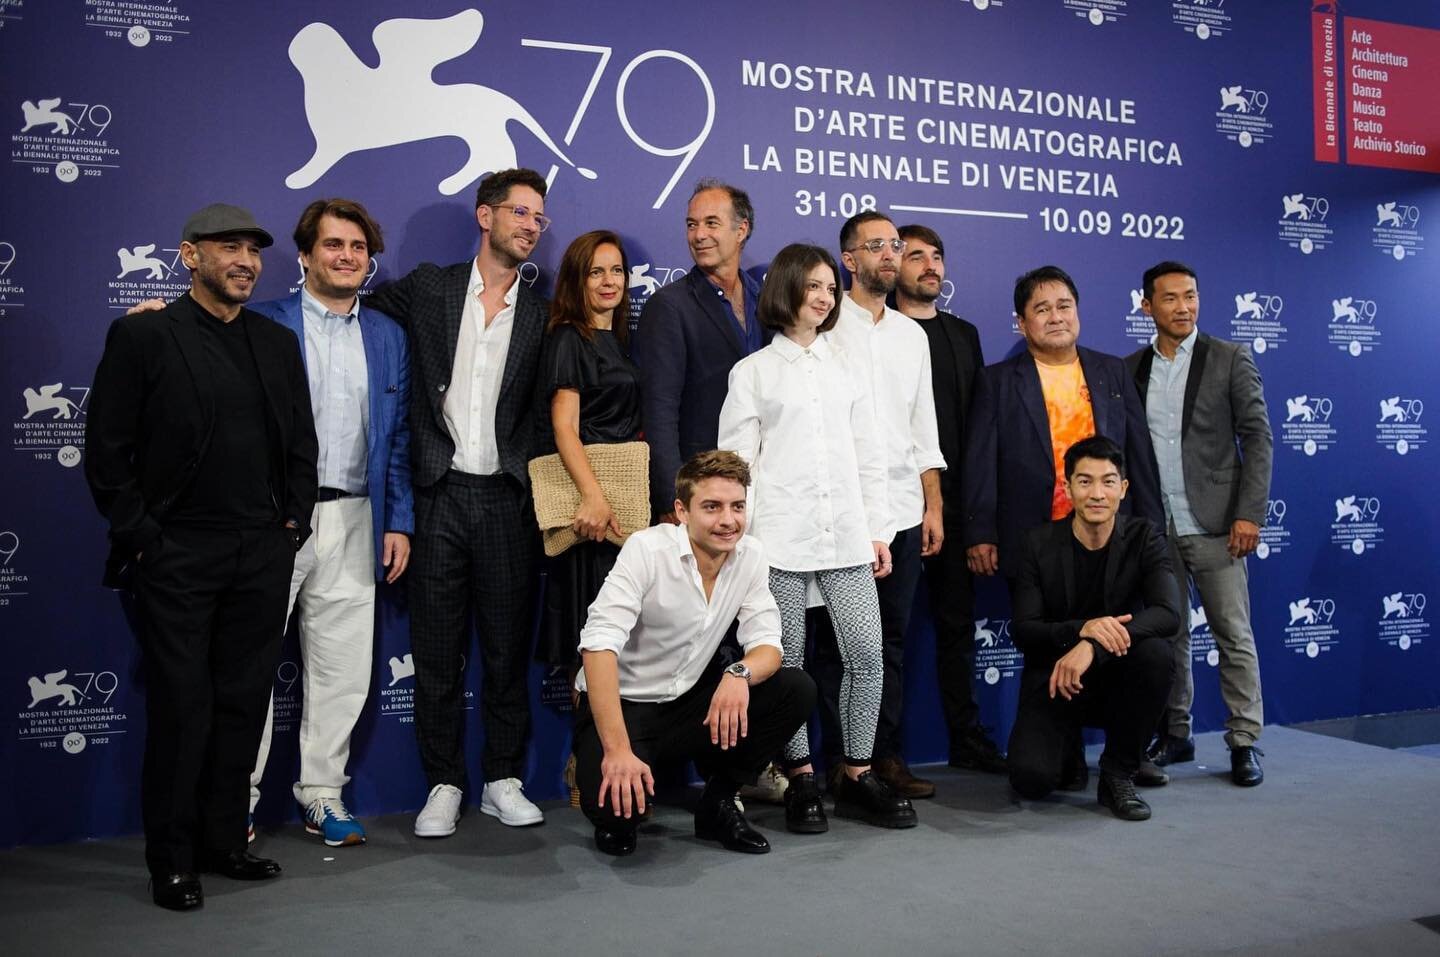 Photocall before the world premiere of @tothenorthmovie by Mihai Mincan at @labiennale di Venezia 2022!

Congratulations to Mihai Mincan for this stunning film, Radu Stancu &amp; Ioanna Lascar of @defilm.ro for leading this wonderful co-production fr